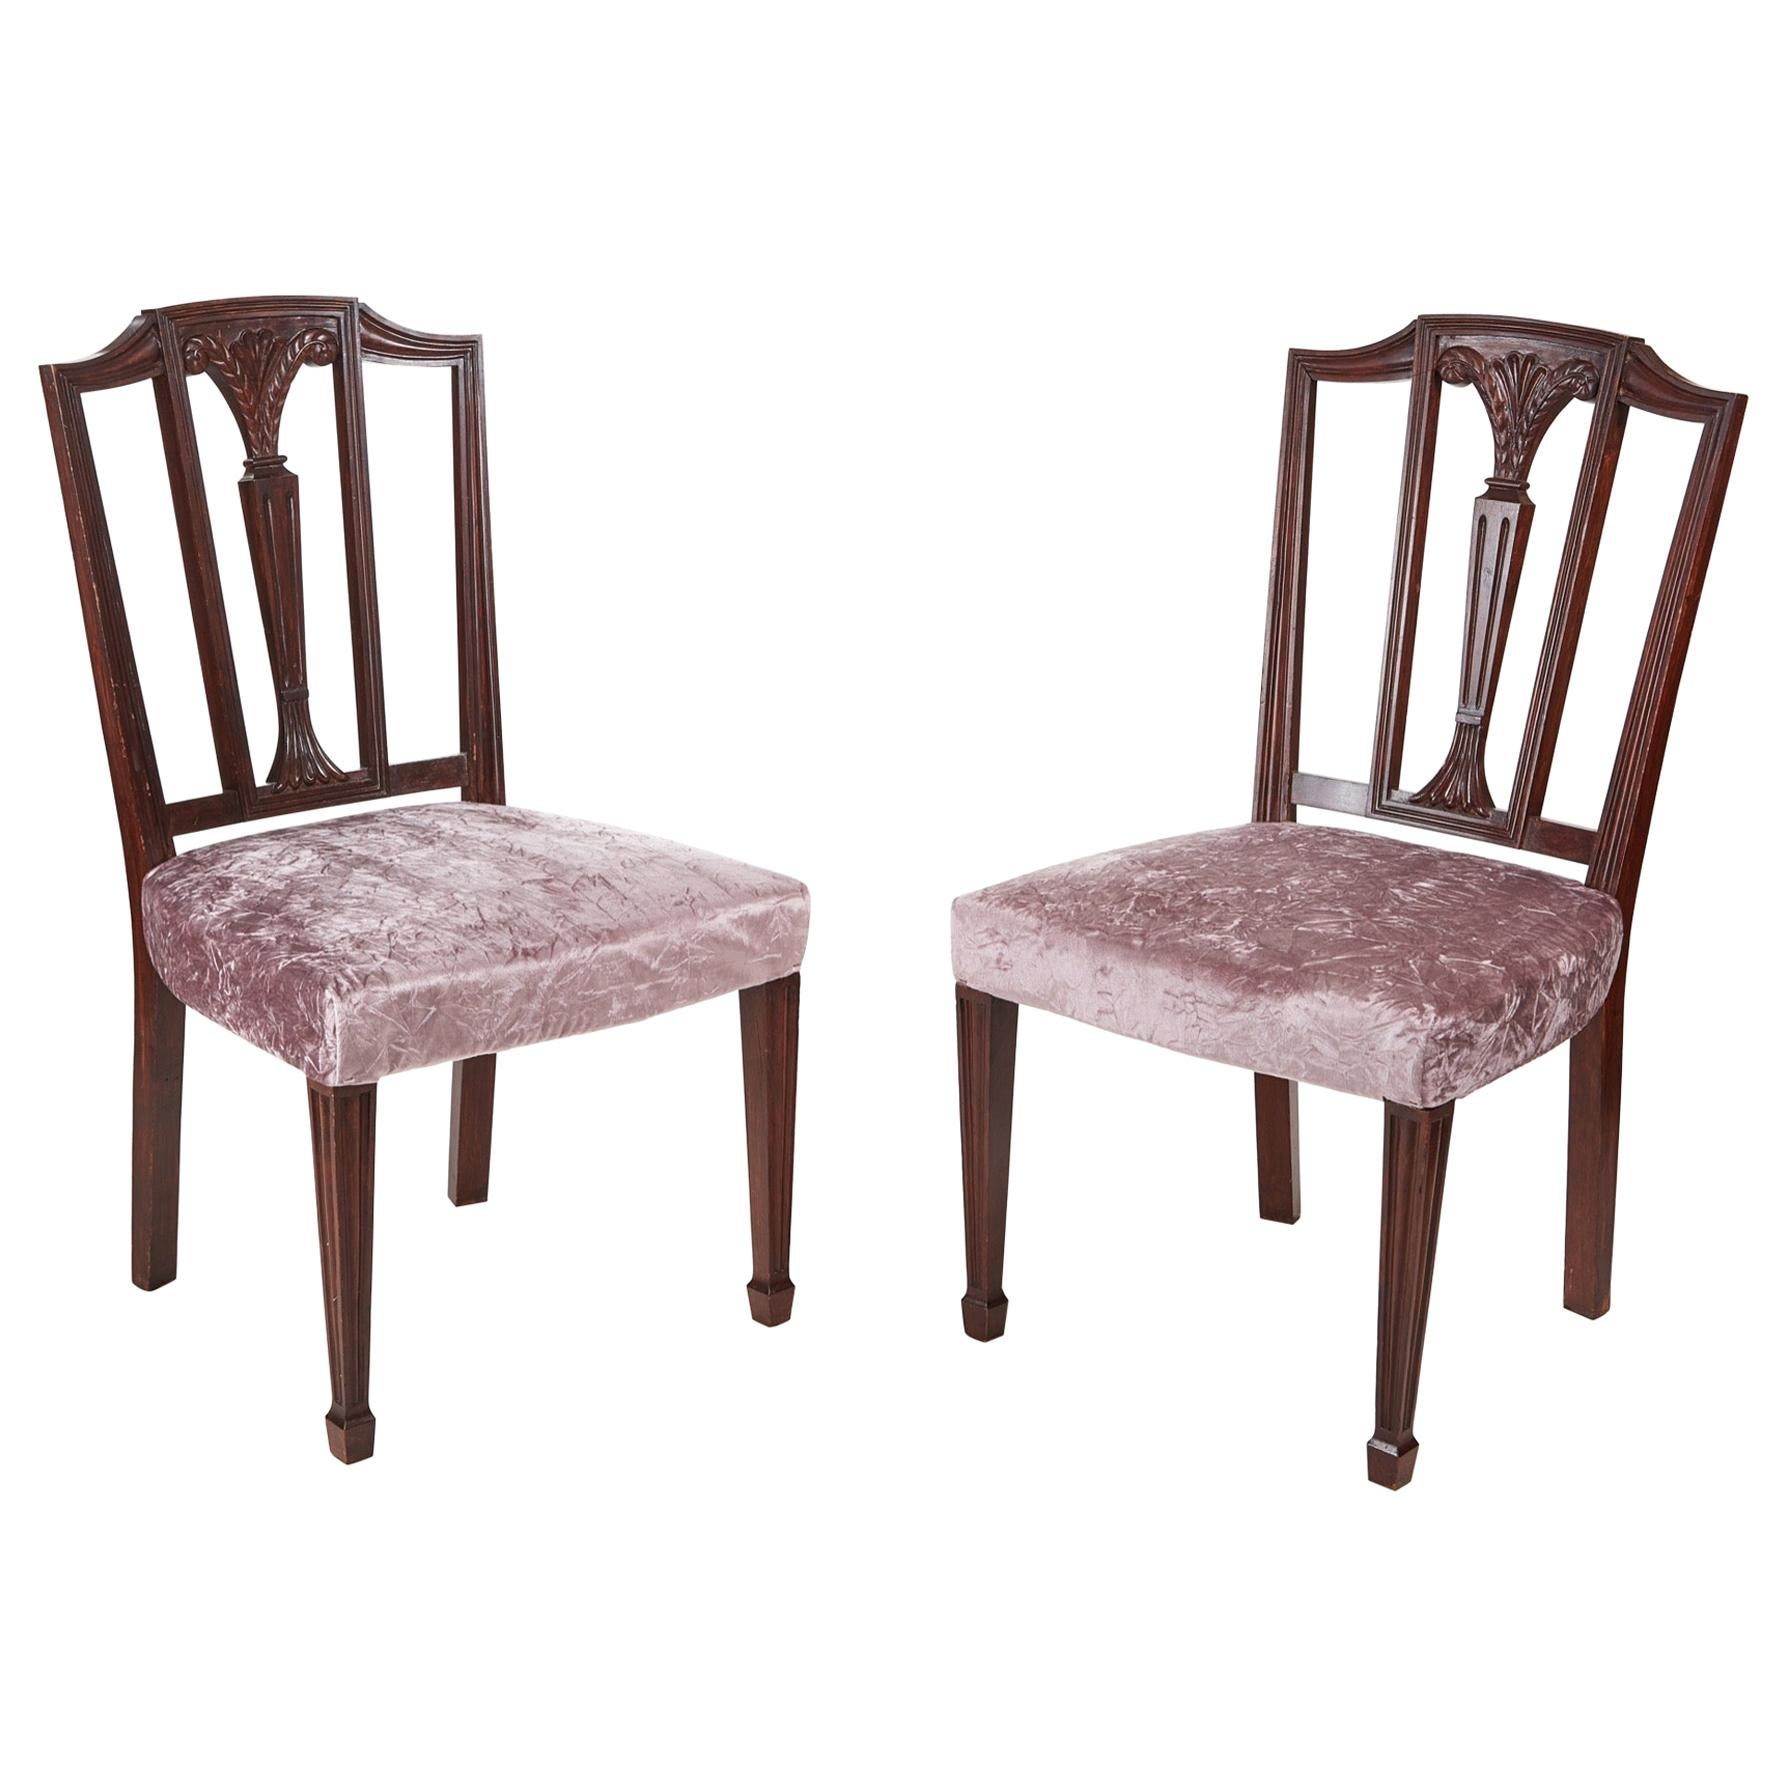 Antique Mahogany Hepplewhite Style Side Chairs